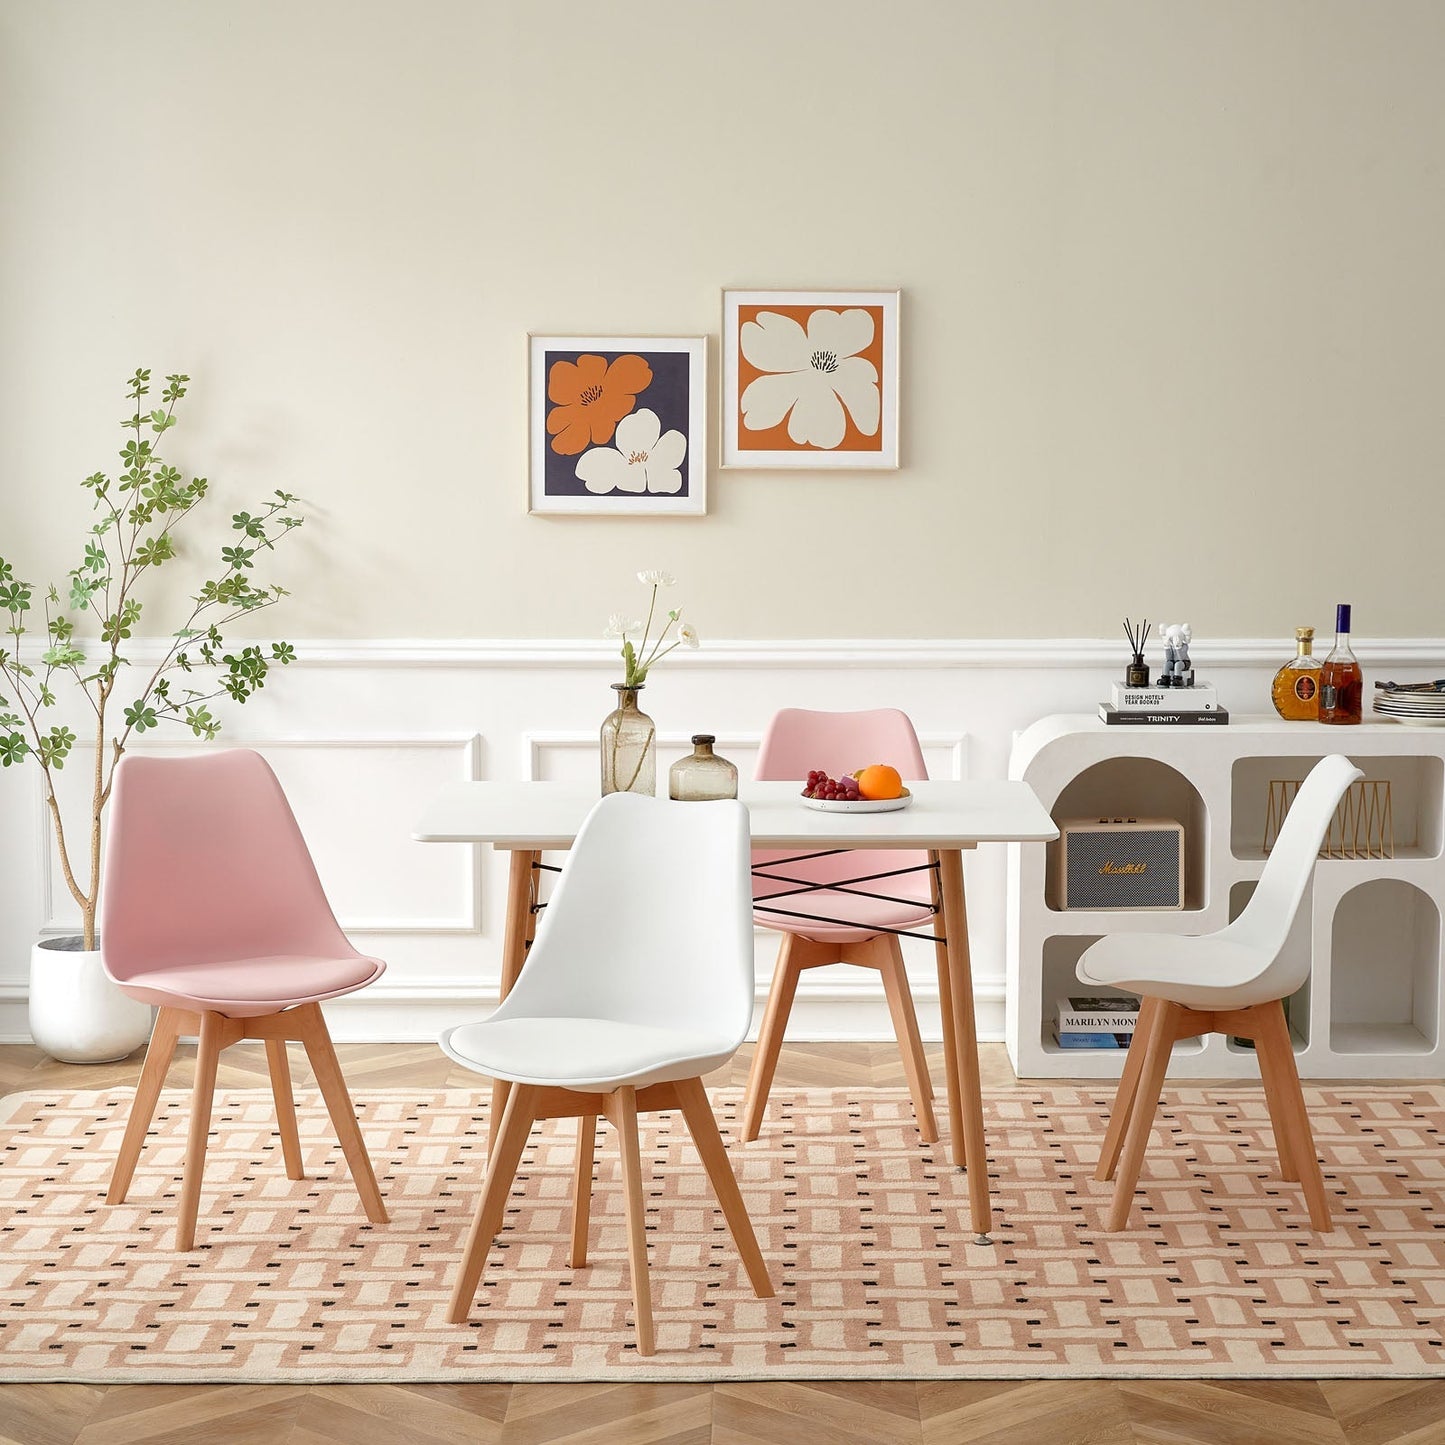 TULIP PP Dining Chairs with Beech Leg Scandinavian design Kitchen Chairs - White and pink